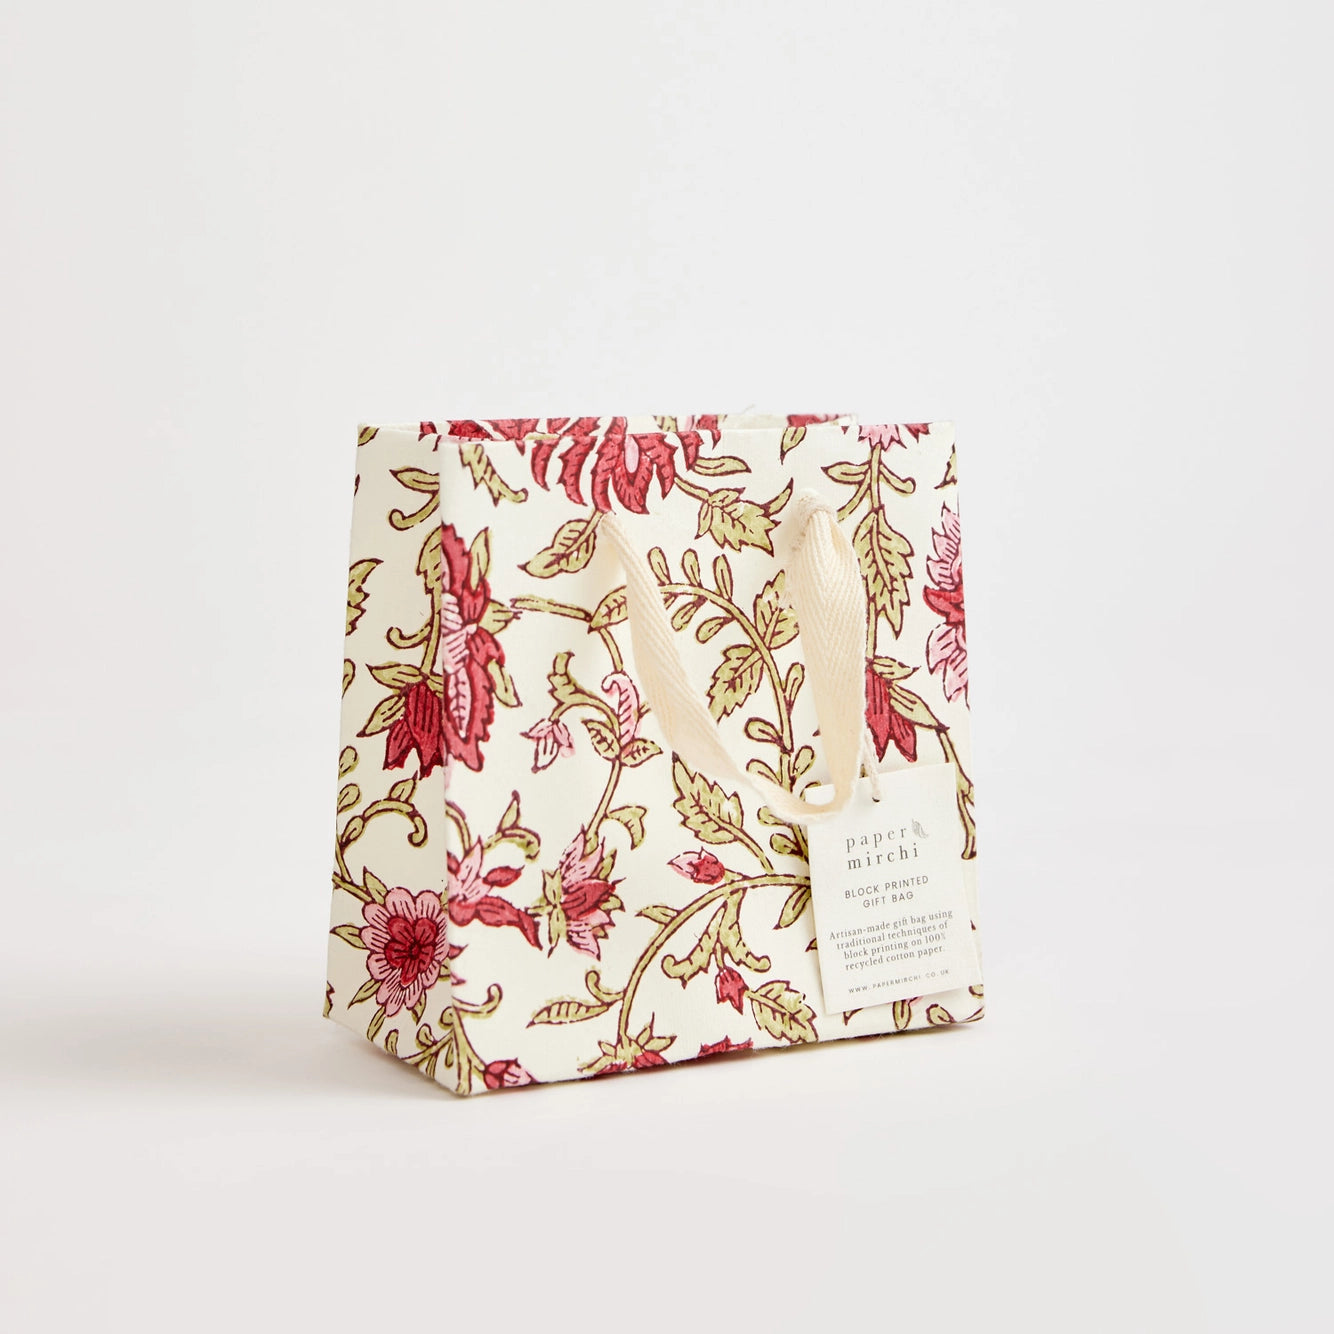 Block Printed Gift Bags | Small | 3 Red Designs Available